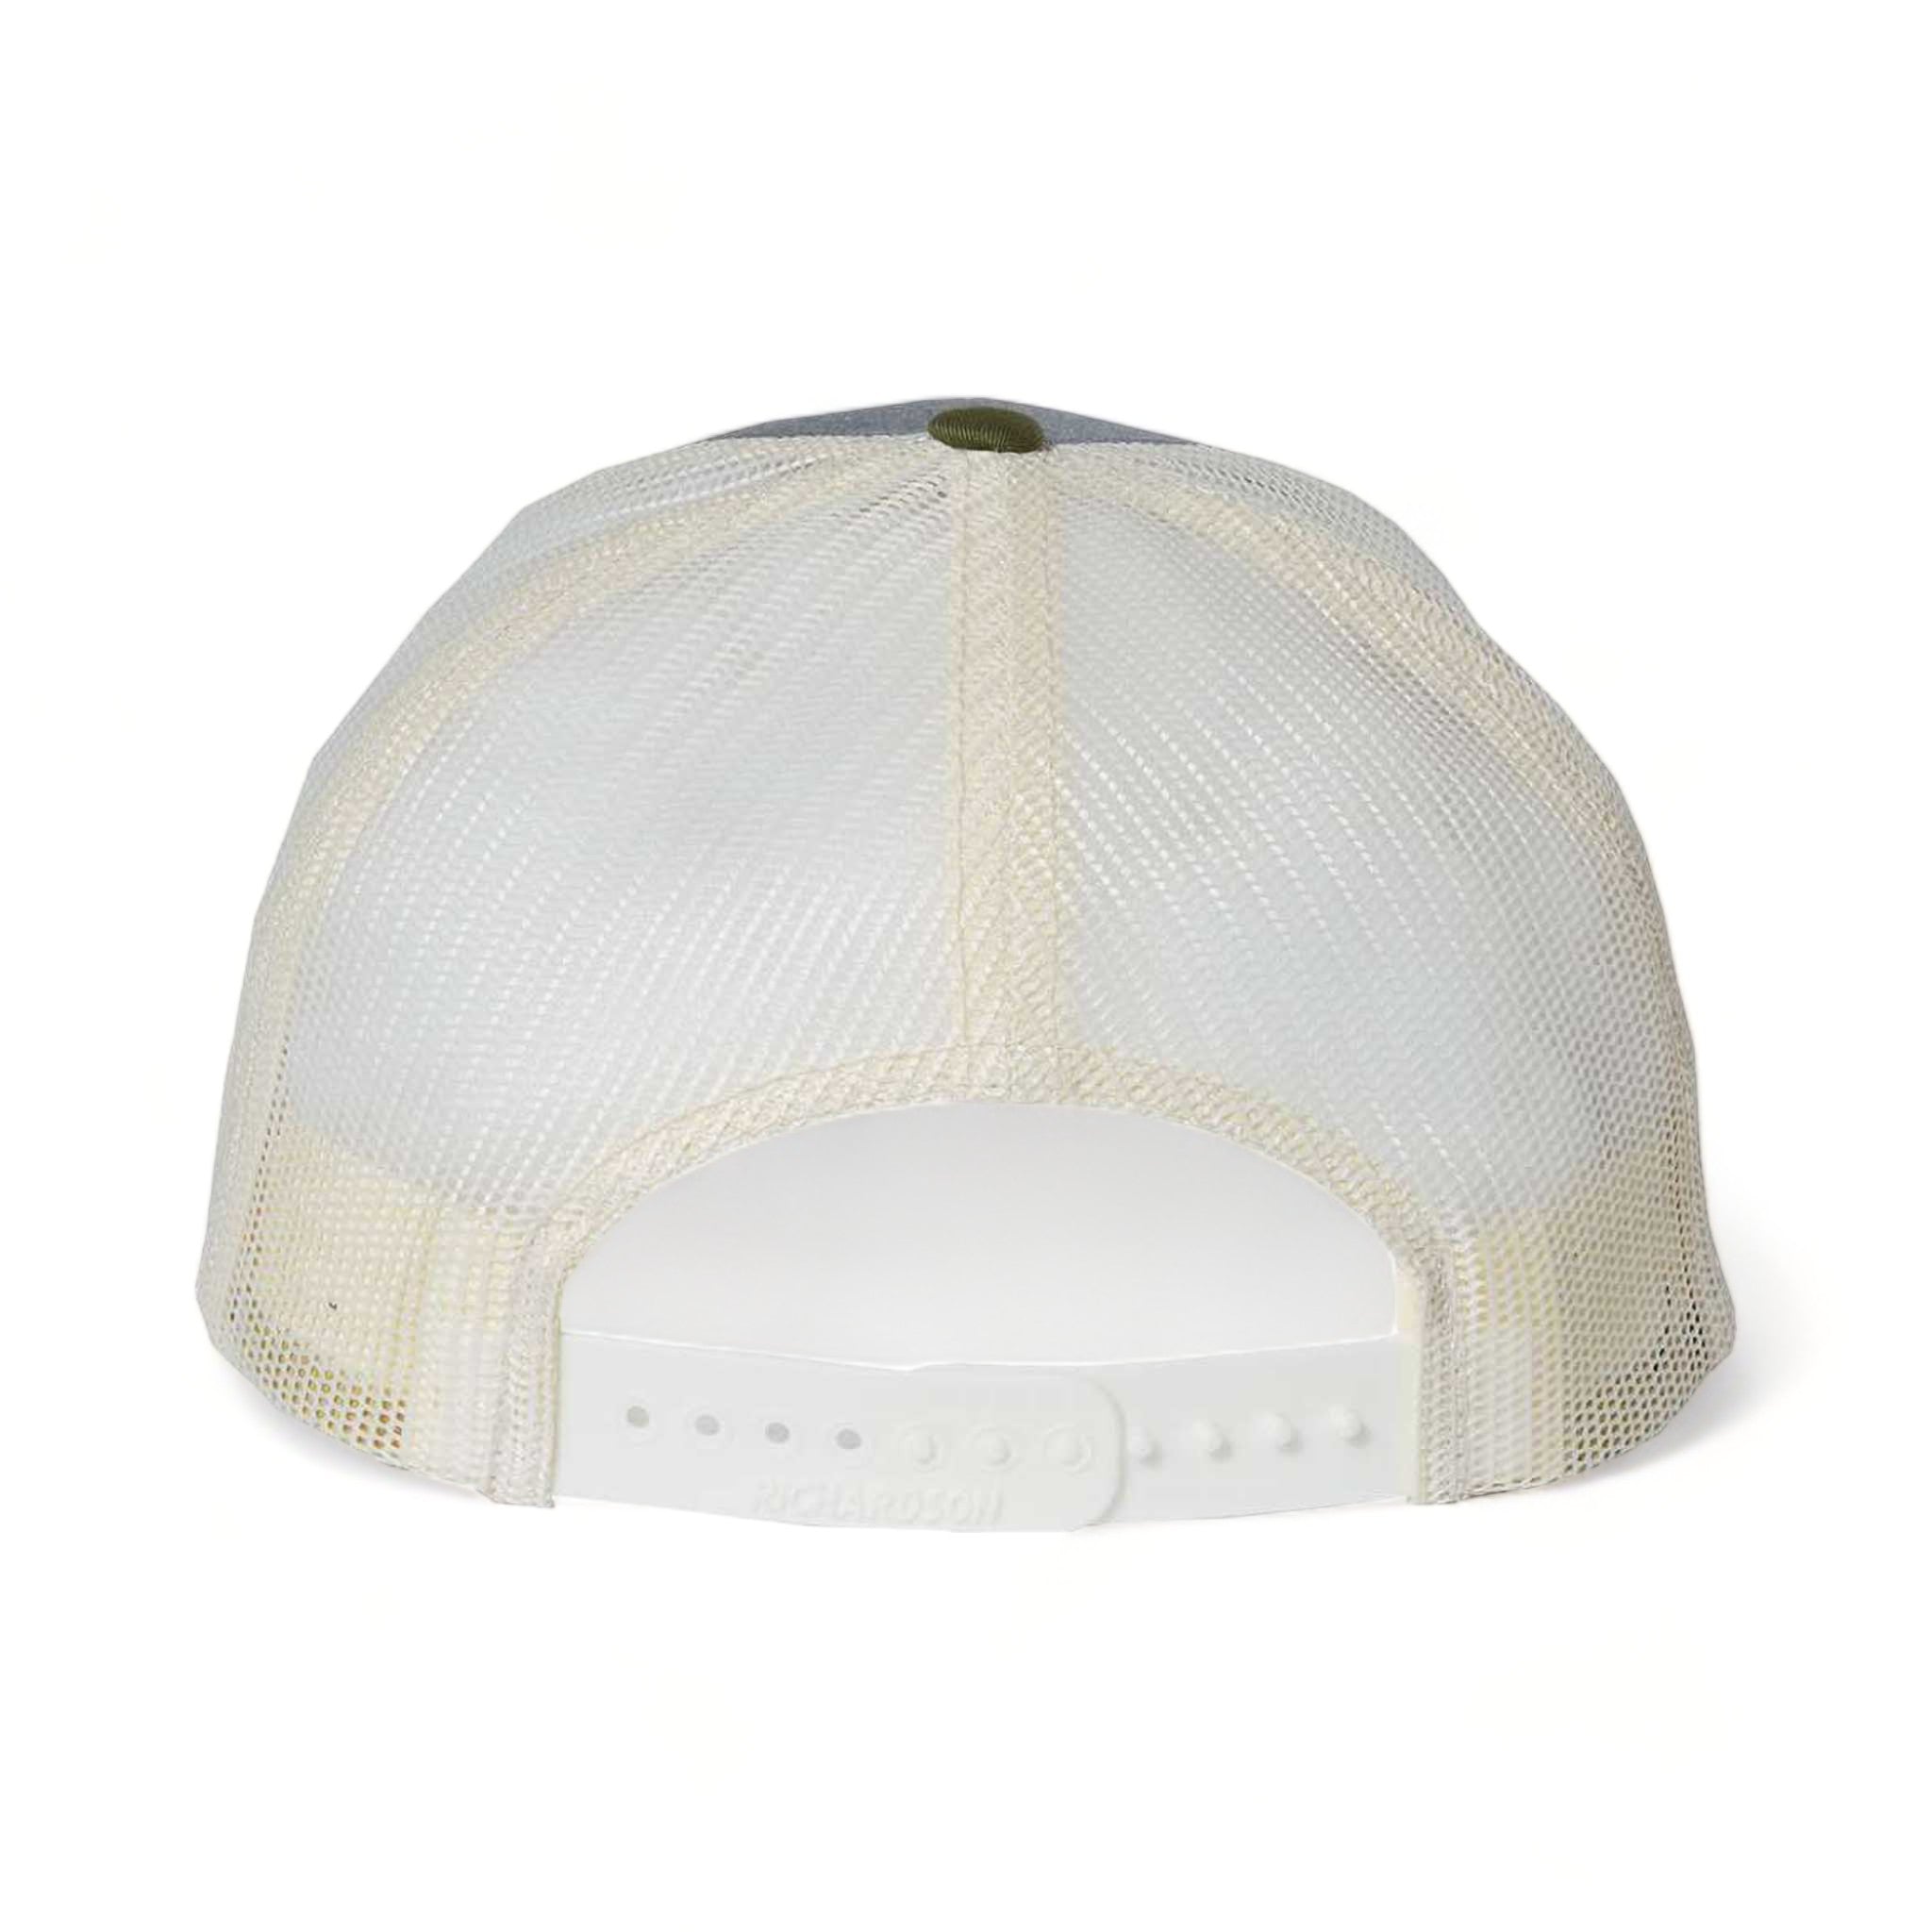 Back view of Richardson 115 custom hat in heather grey, birch and army